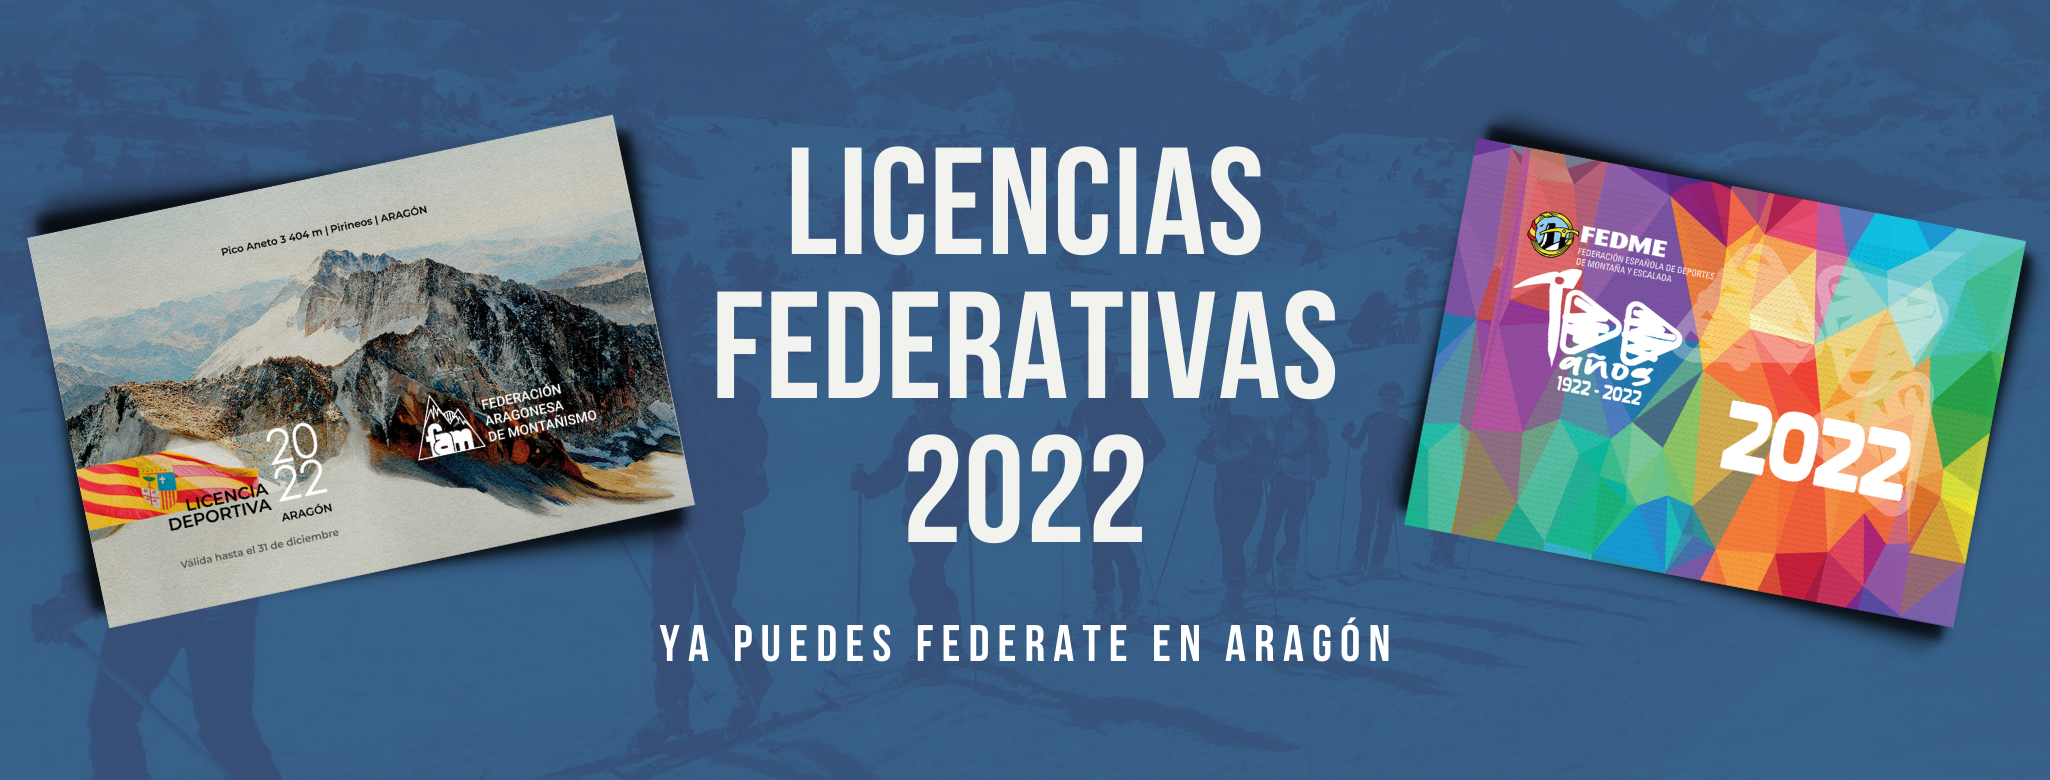 banner federate 2022